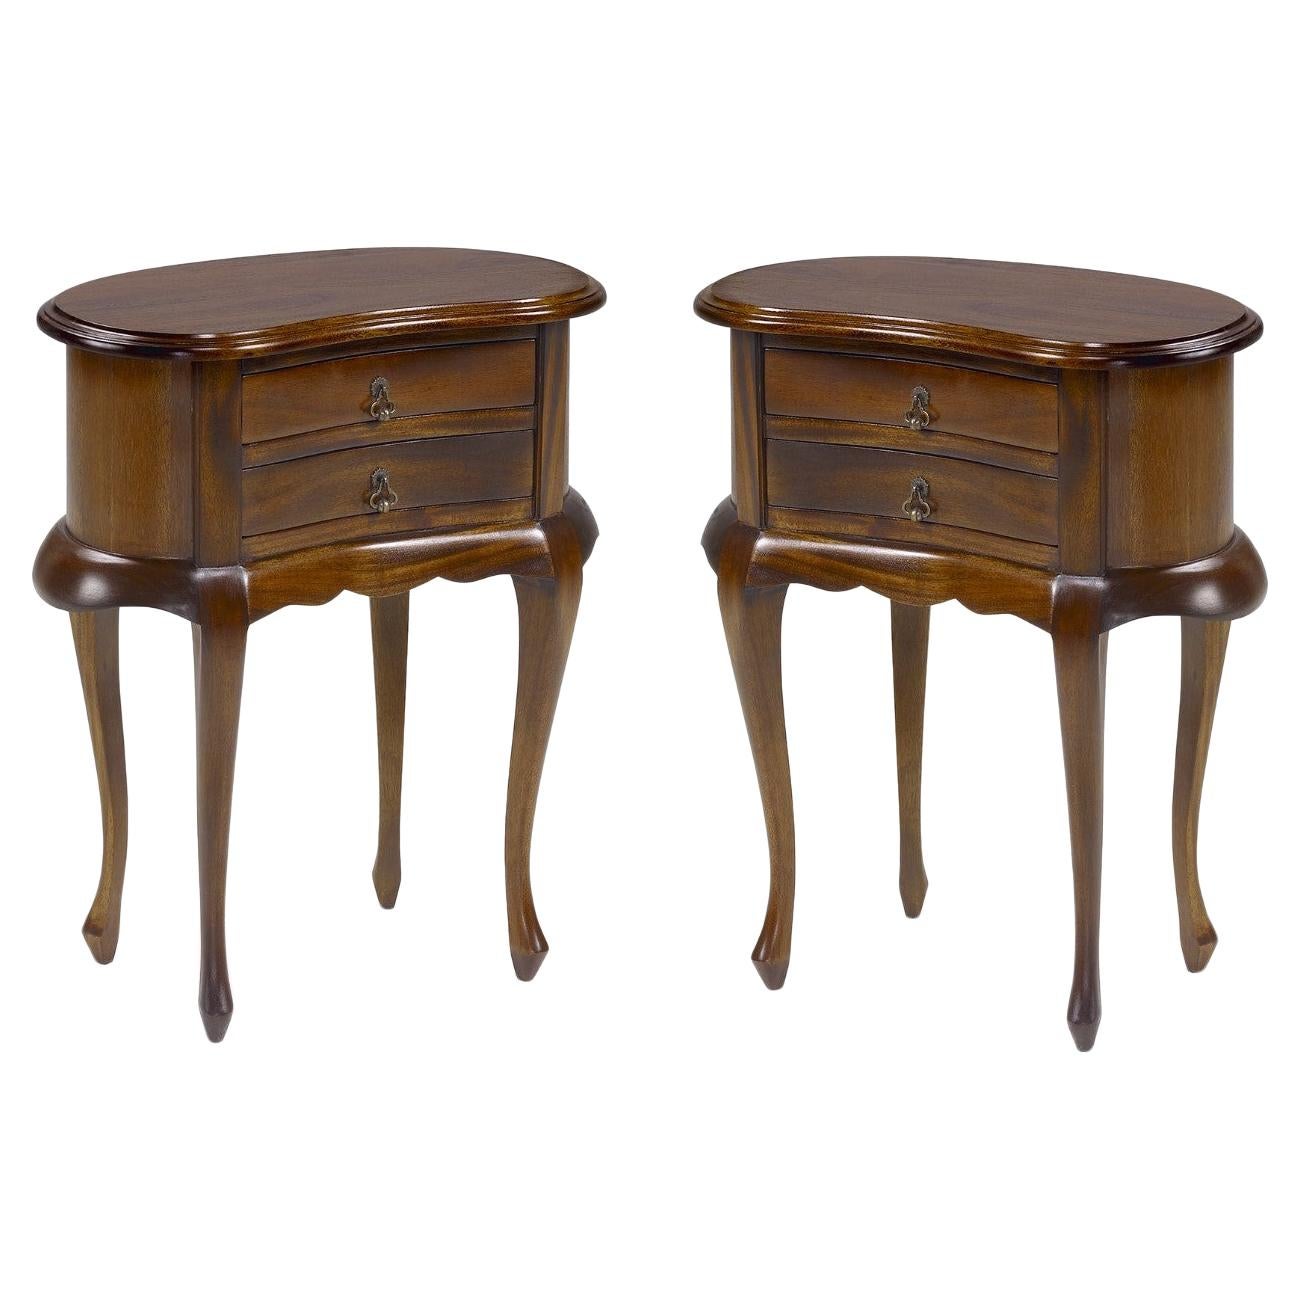 20th Century Pair of Mahogany Nightstands with Kidney Shape and Two Drawers For Sale